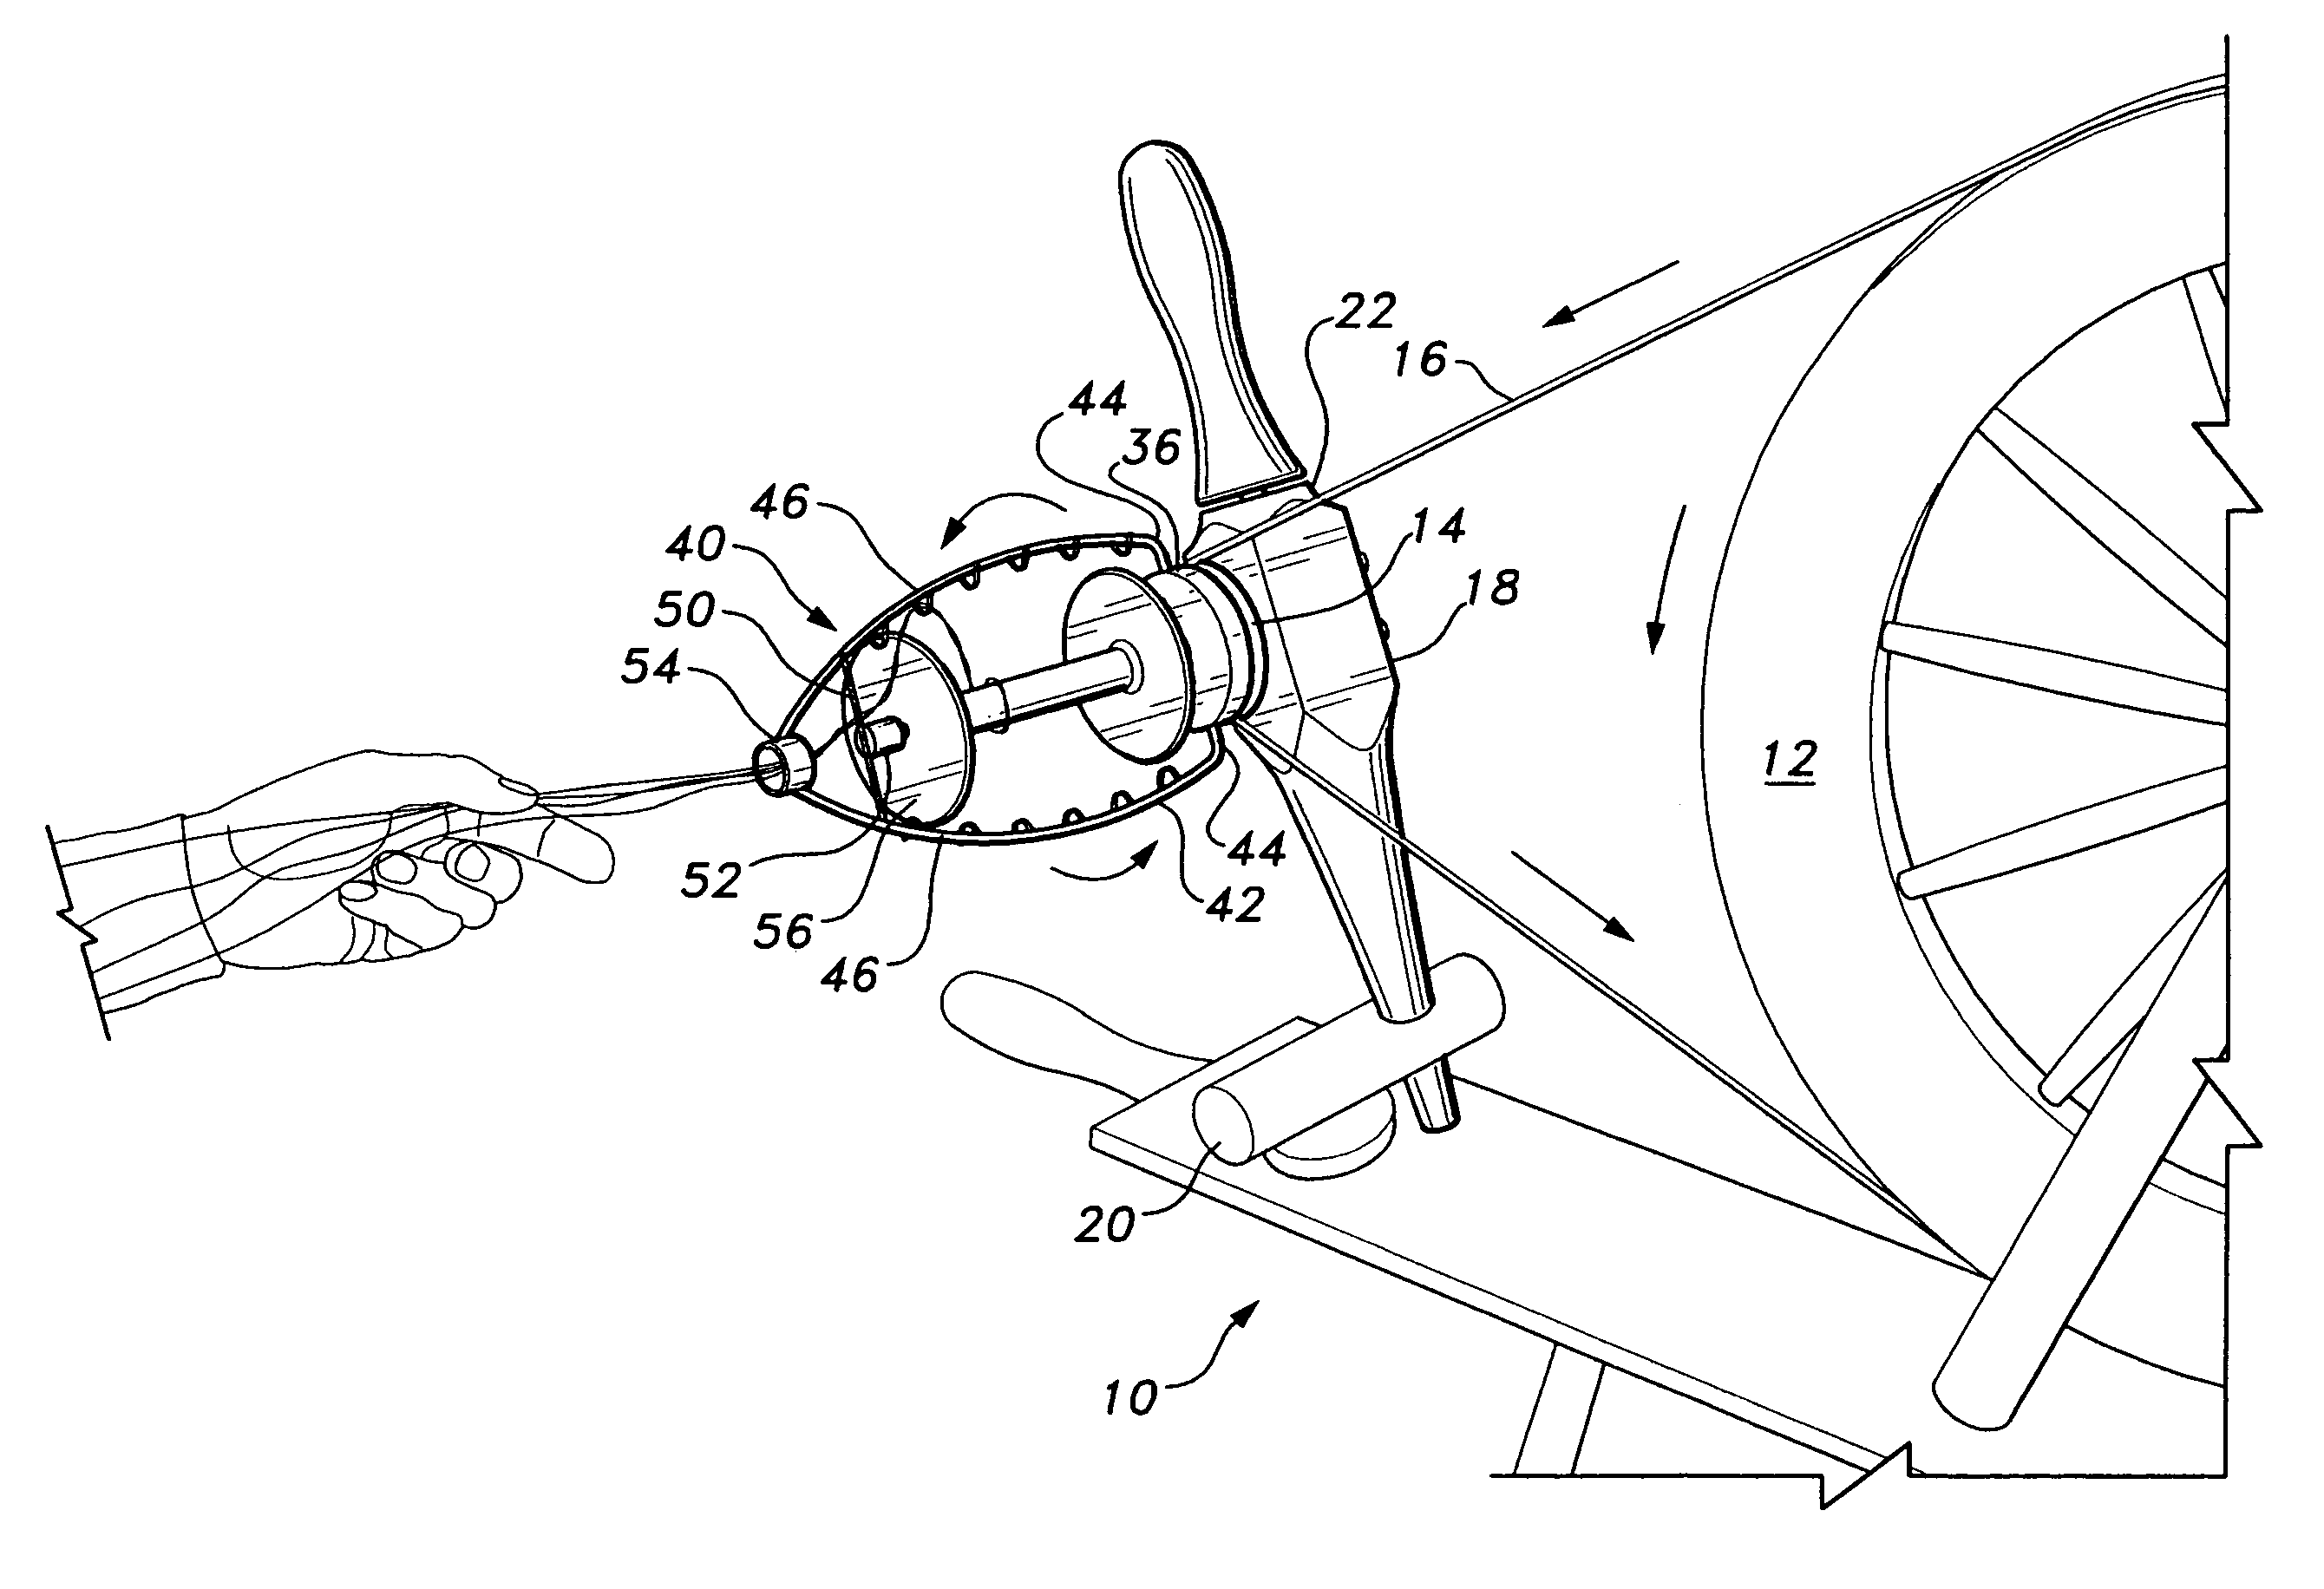 Flyer and spindle brake assembly for handspinning wheels